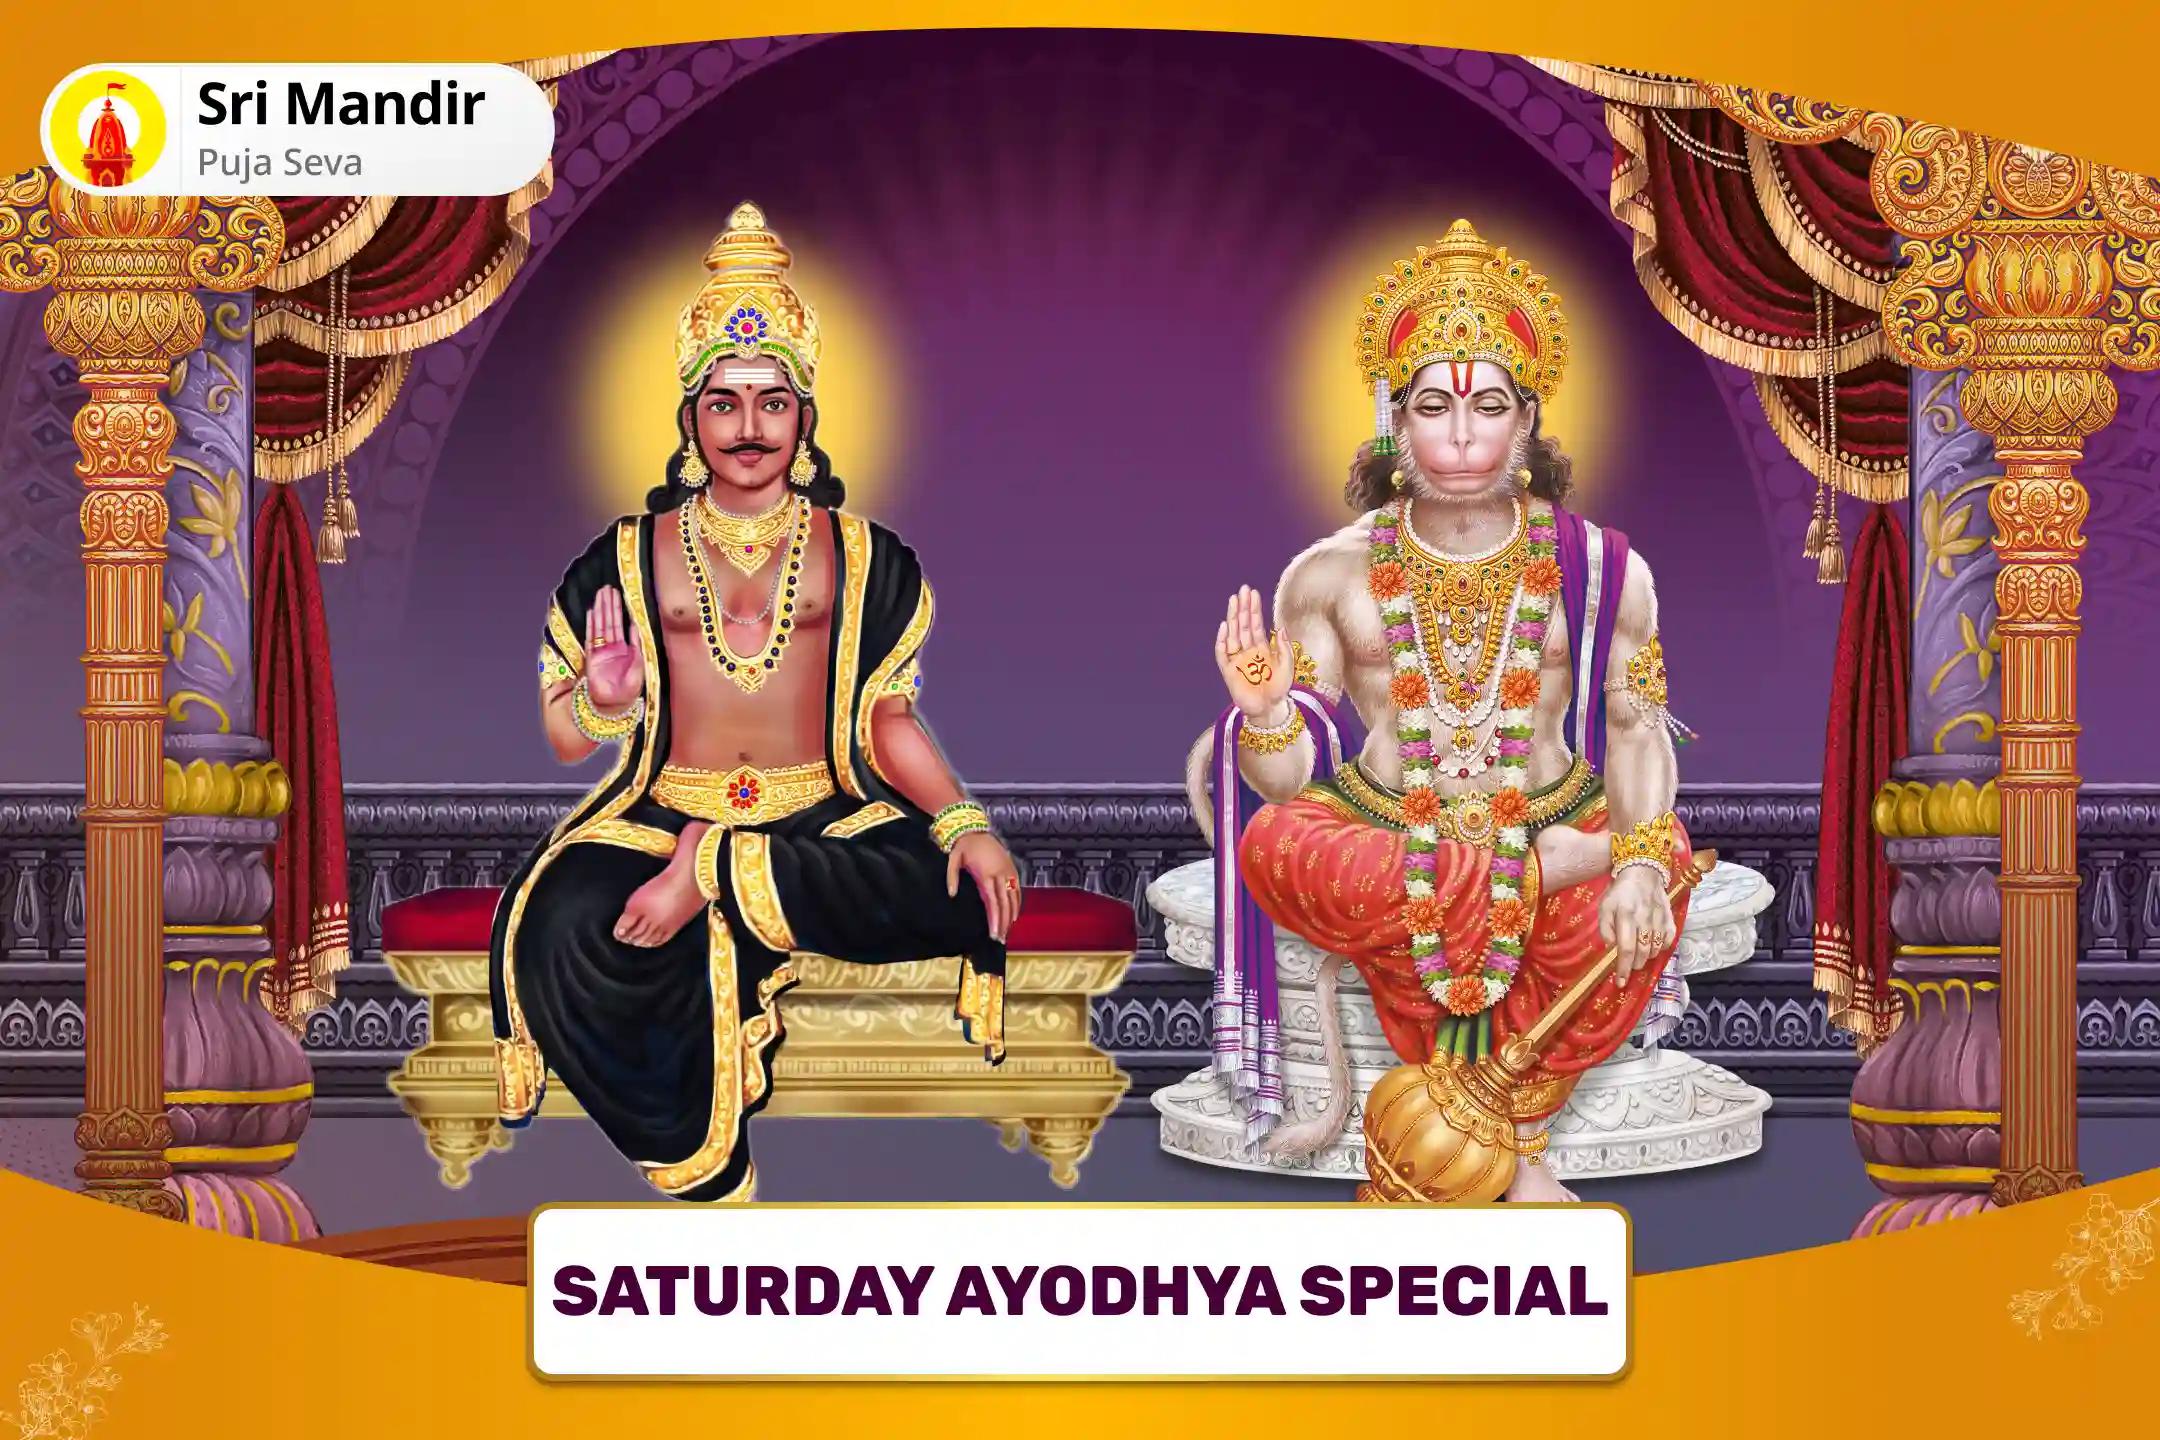 Saturday Ayodhya Special Shani Shanti Special Panchmukhi Hanuman Kavach Stotra Path and 1008 Shani Mool Mantra Jaap and Havan For Relief from Shani Dosh in one's Horoscope